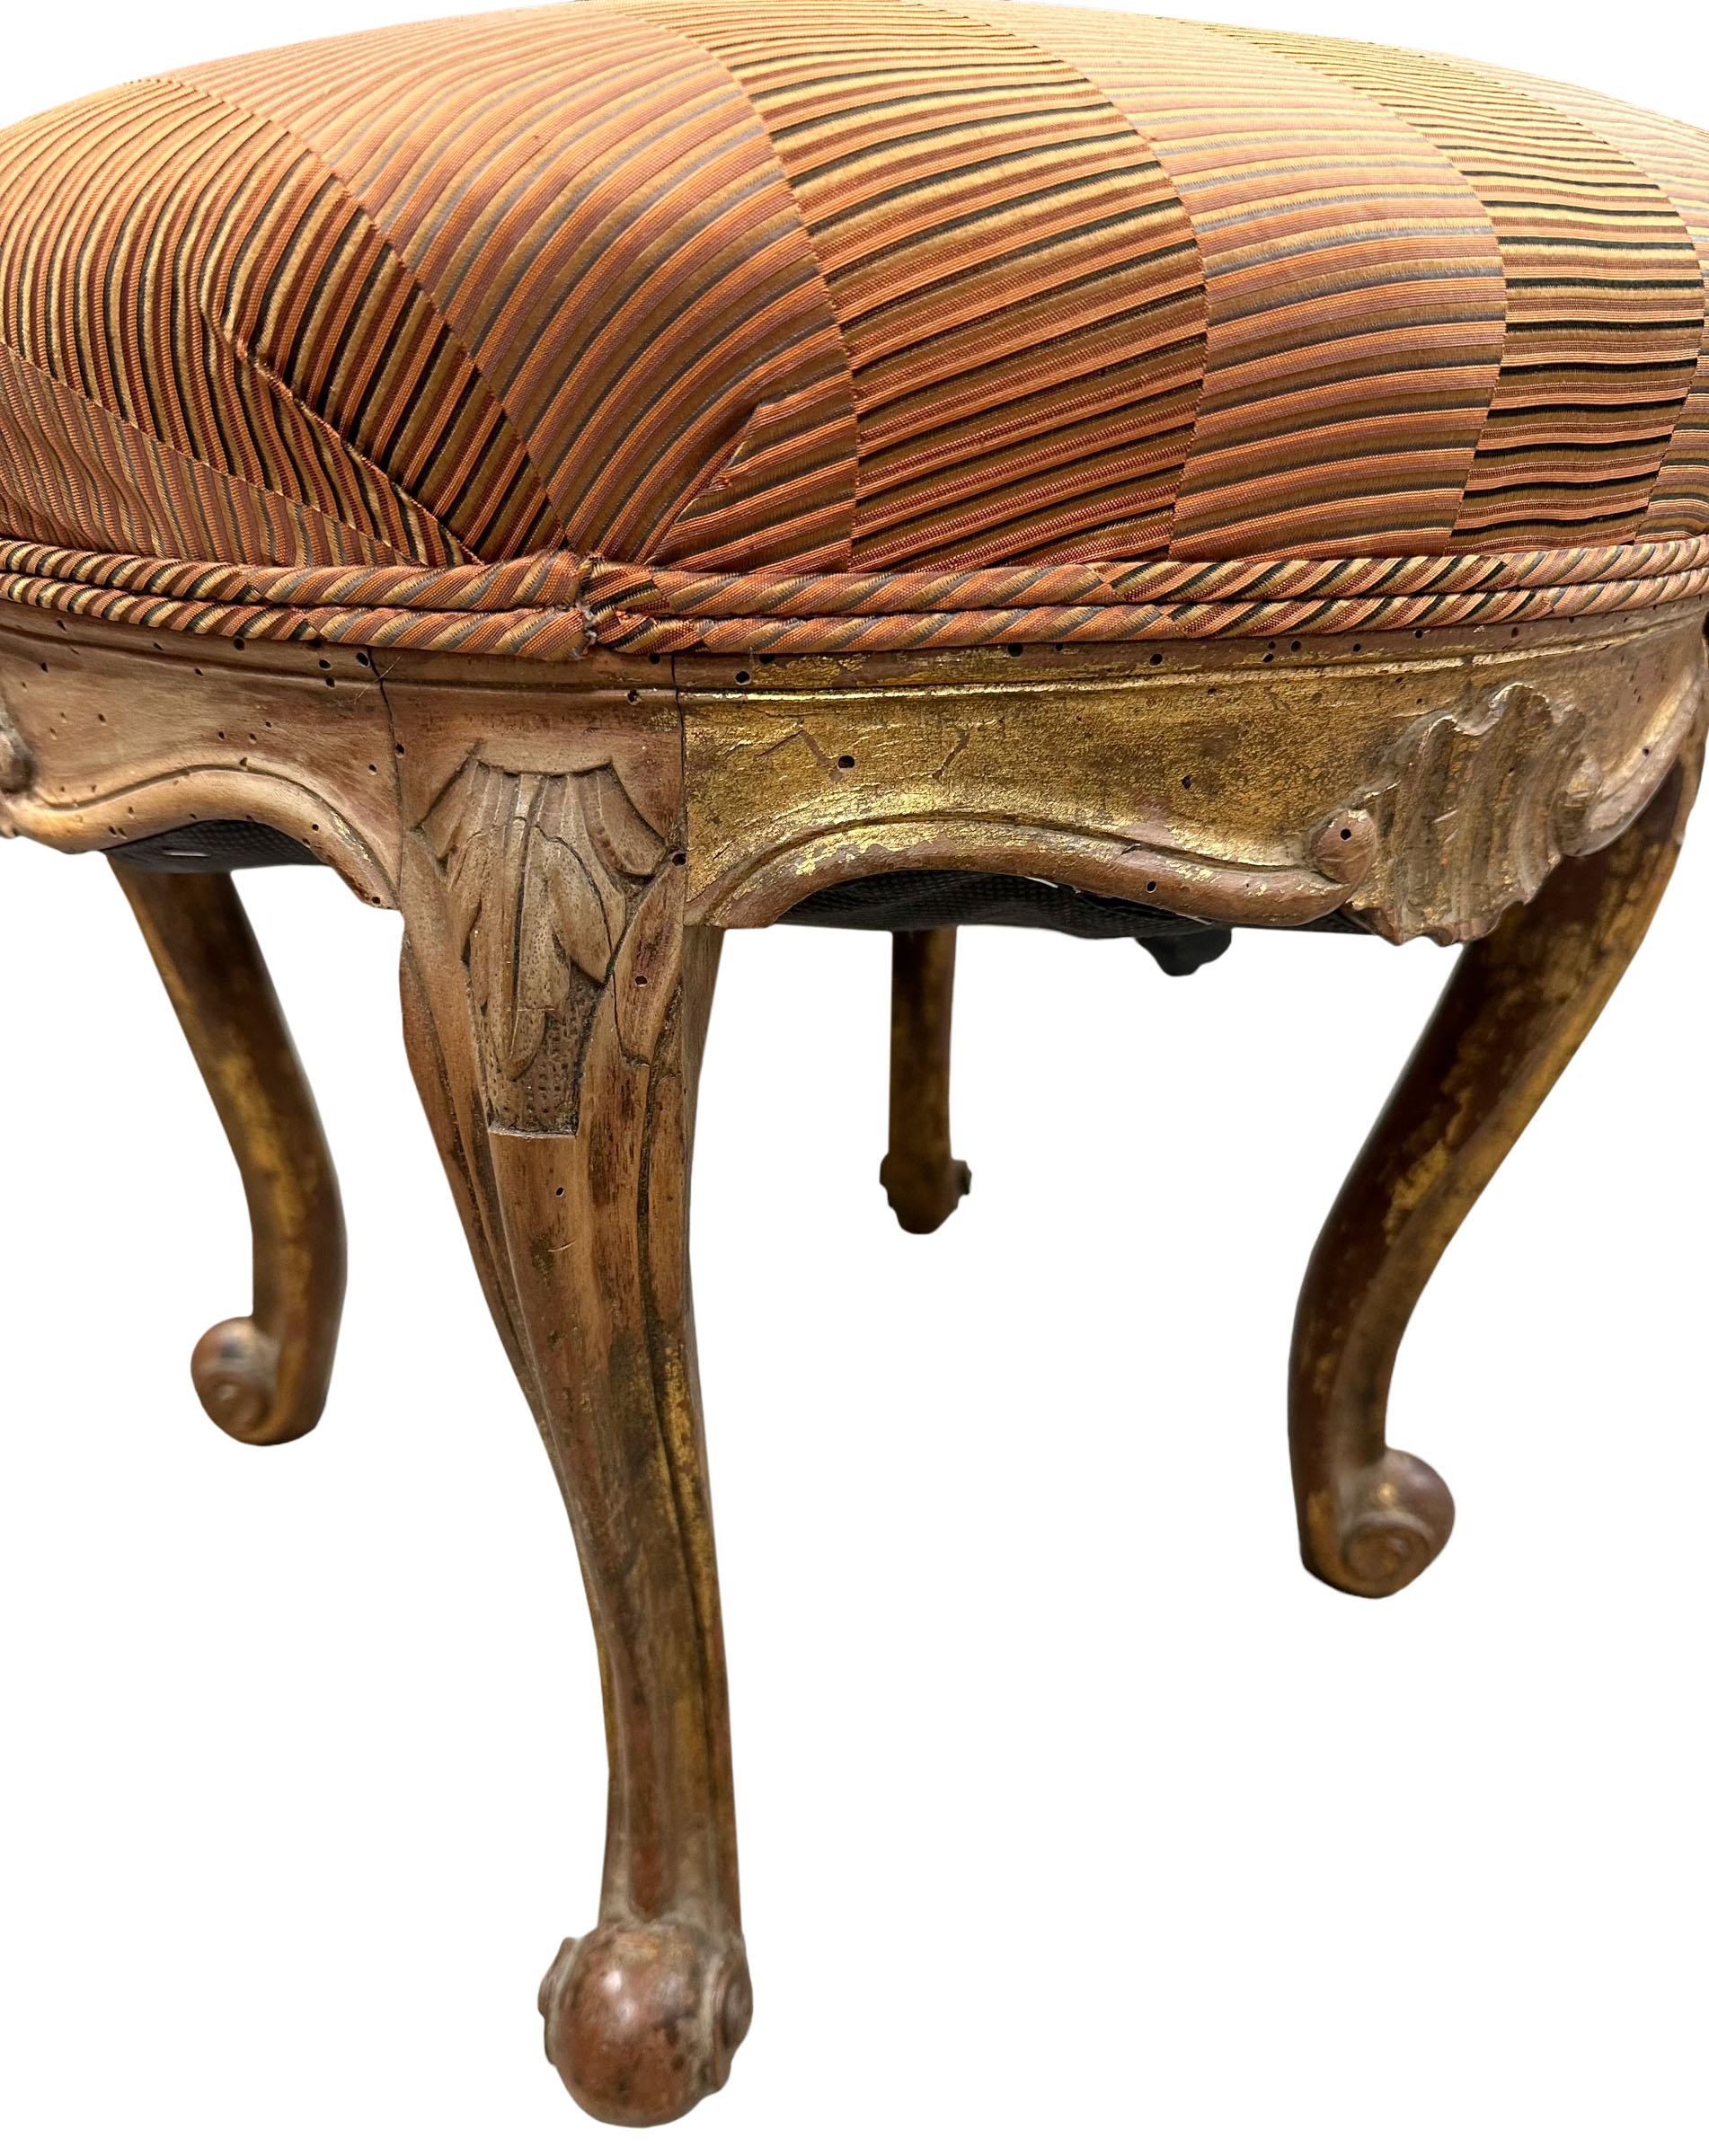 19th Century Gilded Italian Venetian Stool In Good Condition For Sale In Tampa, FL